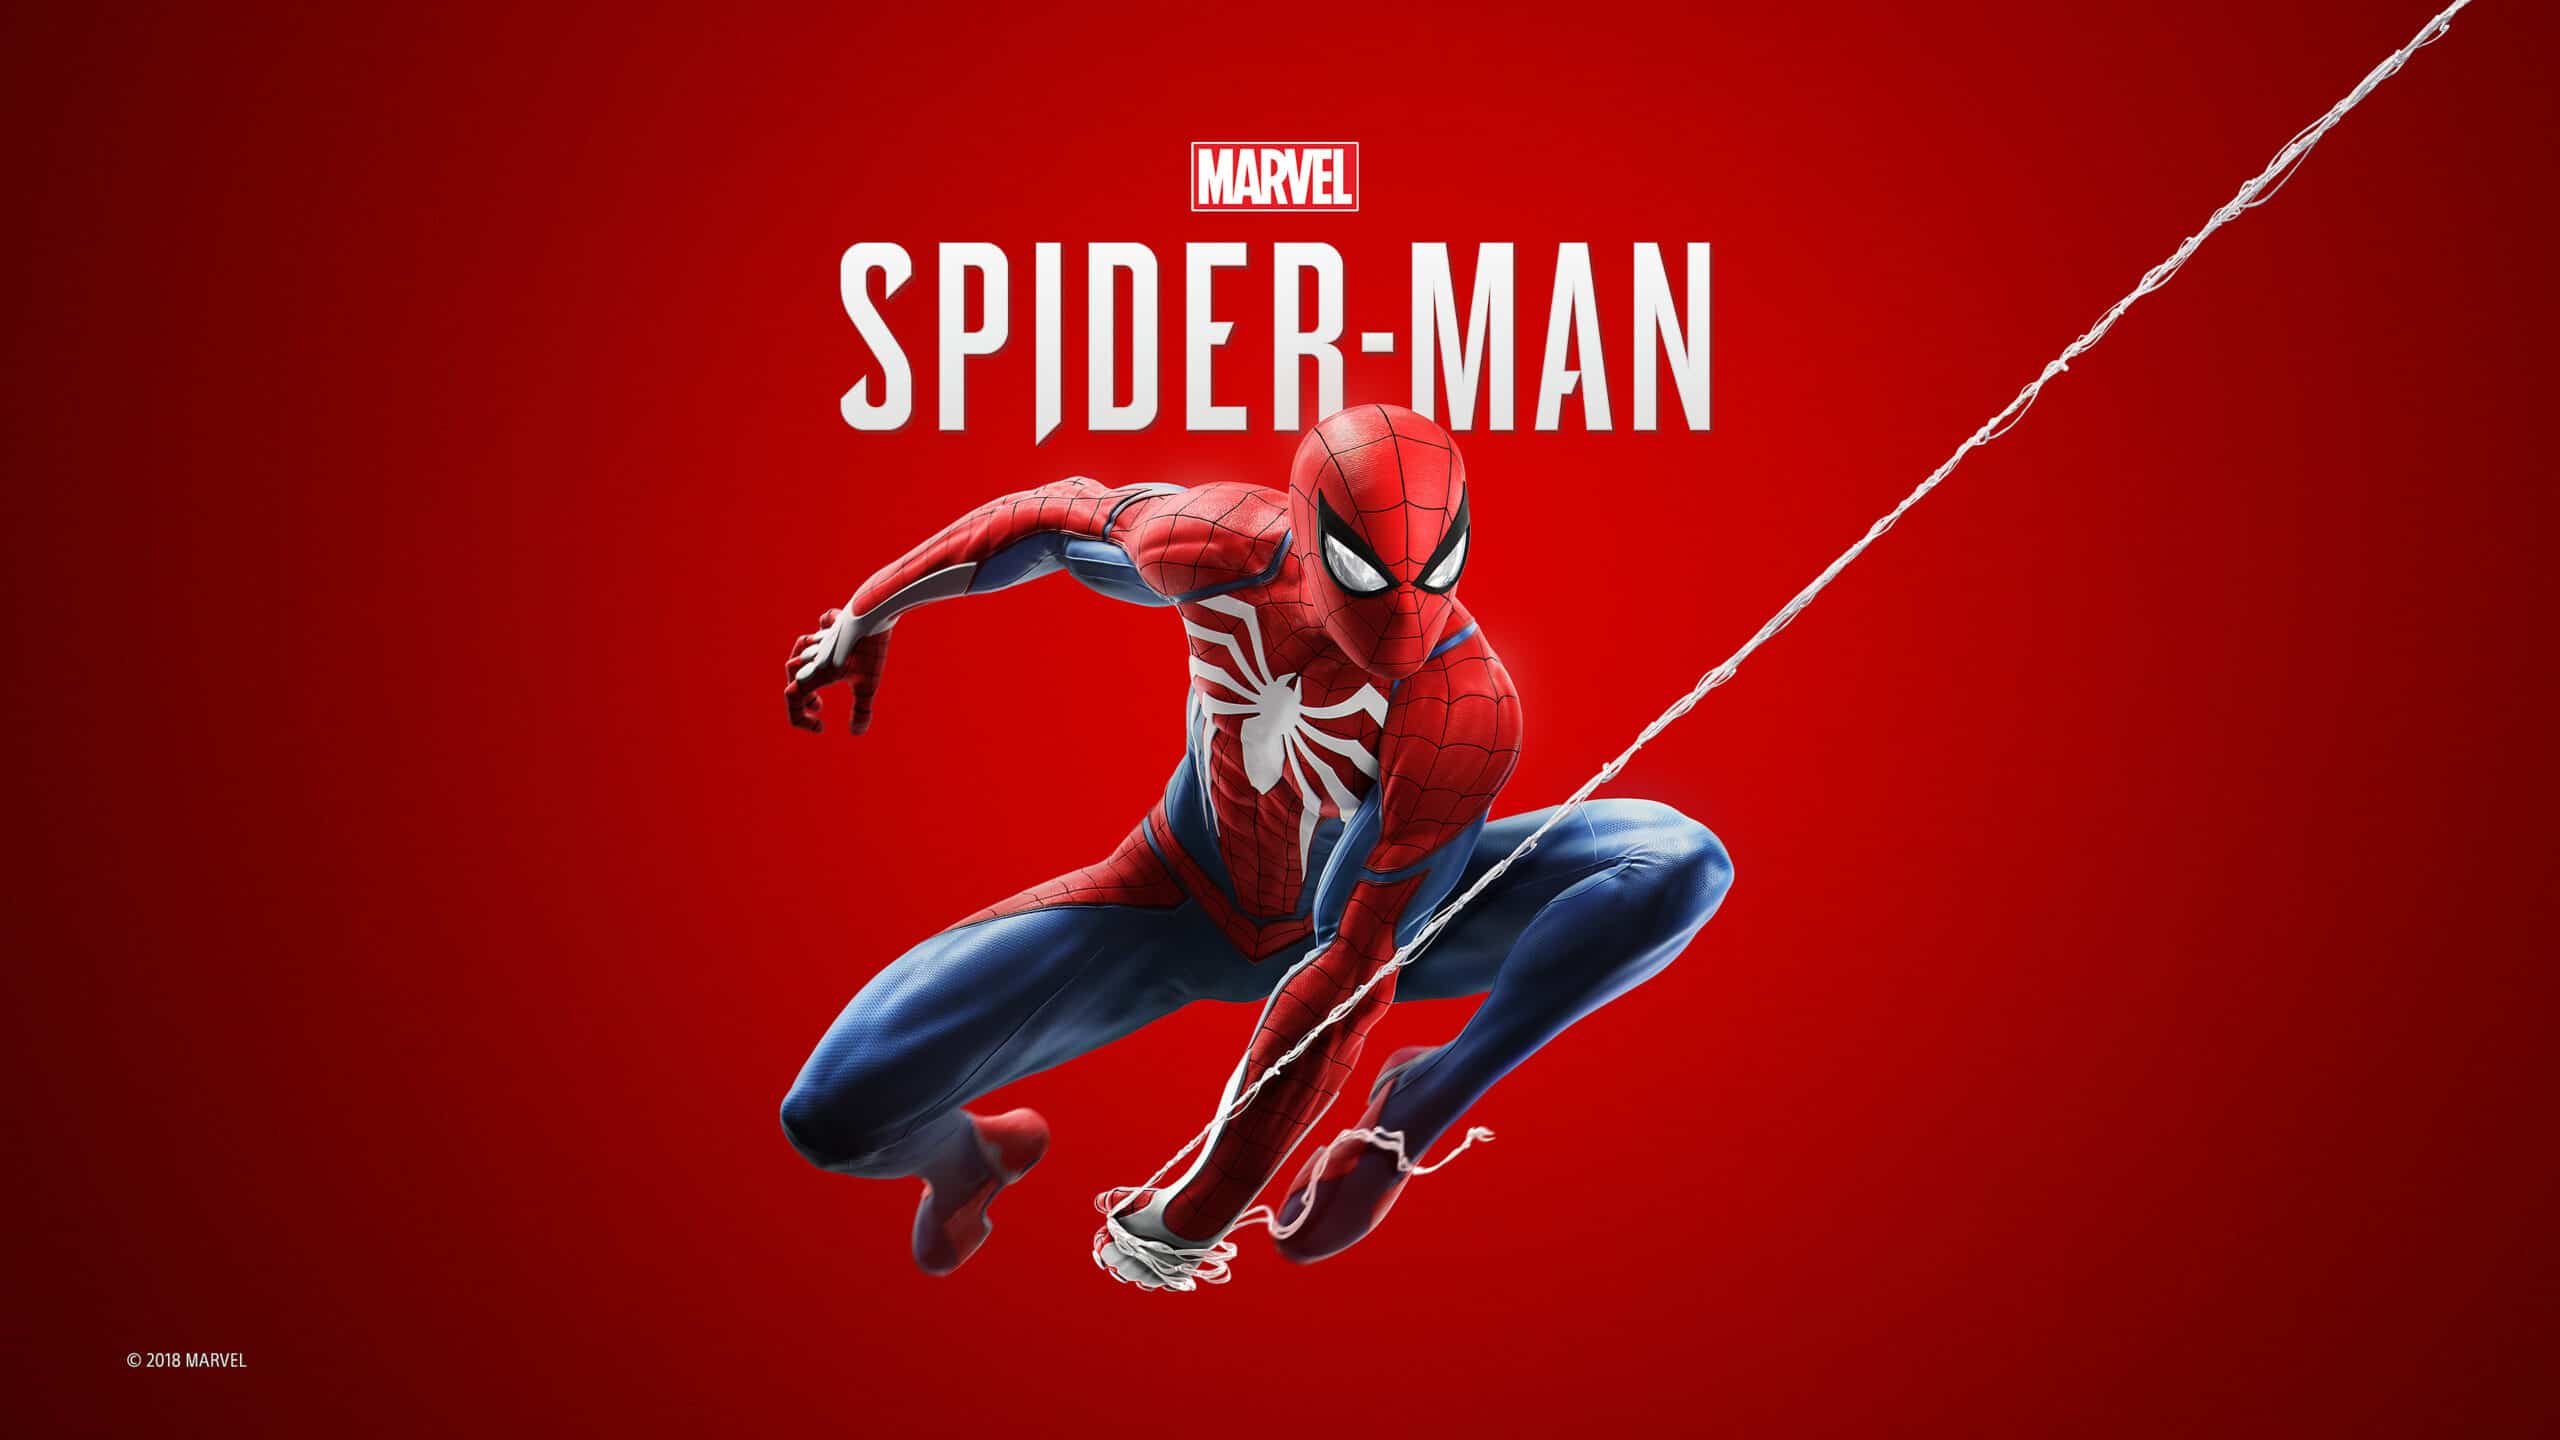 Best Selling Ps4 Games - Spider-Man